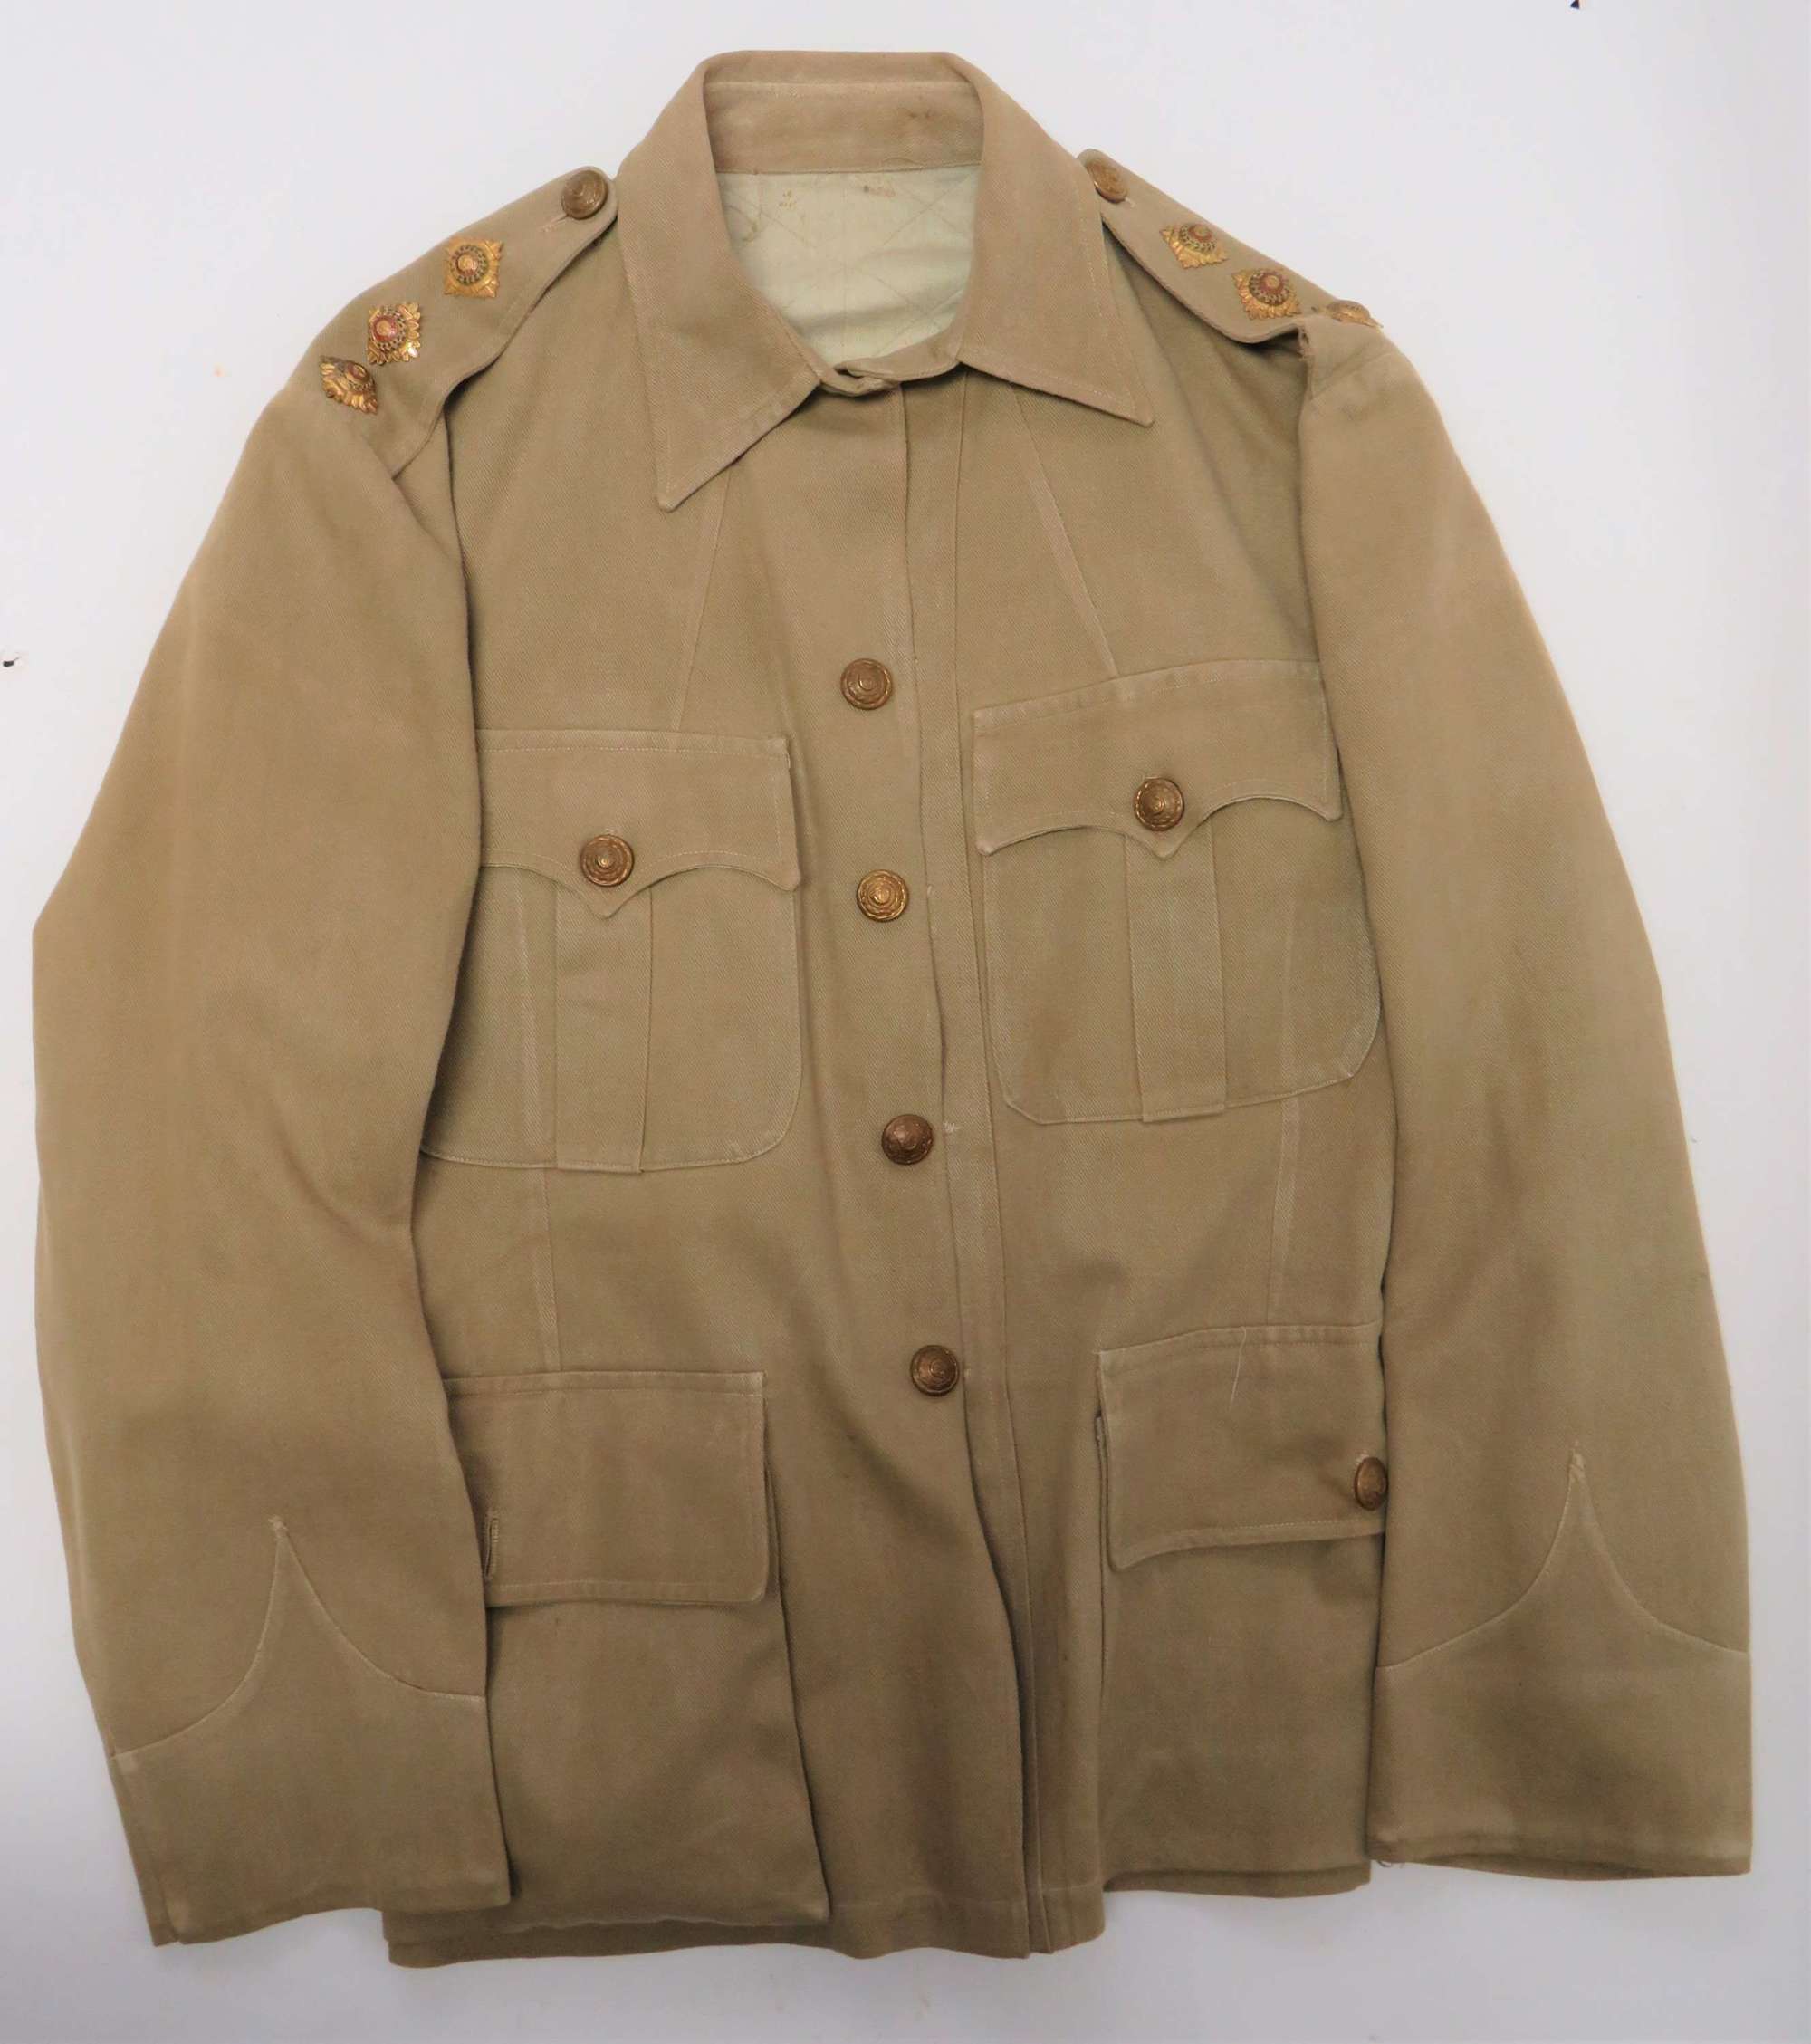 Rare Interwar Officers Tropical Tunic with Spine Protector